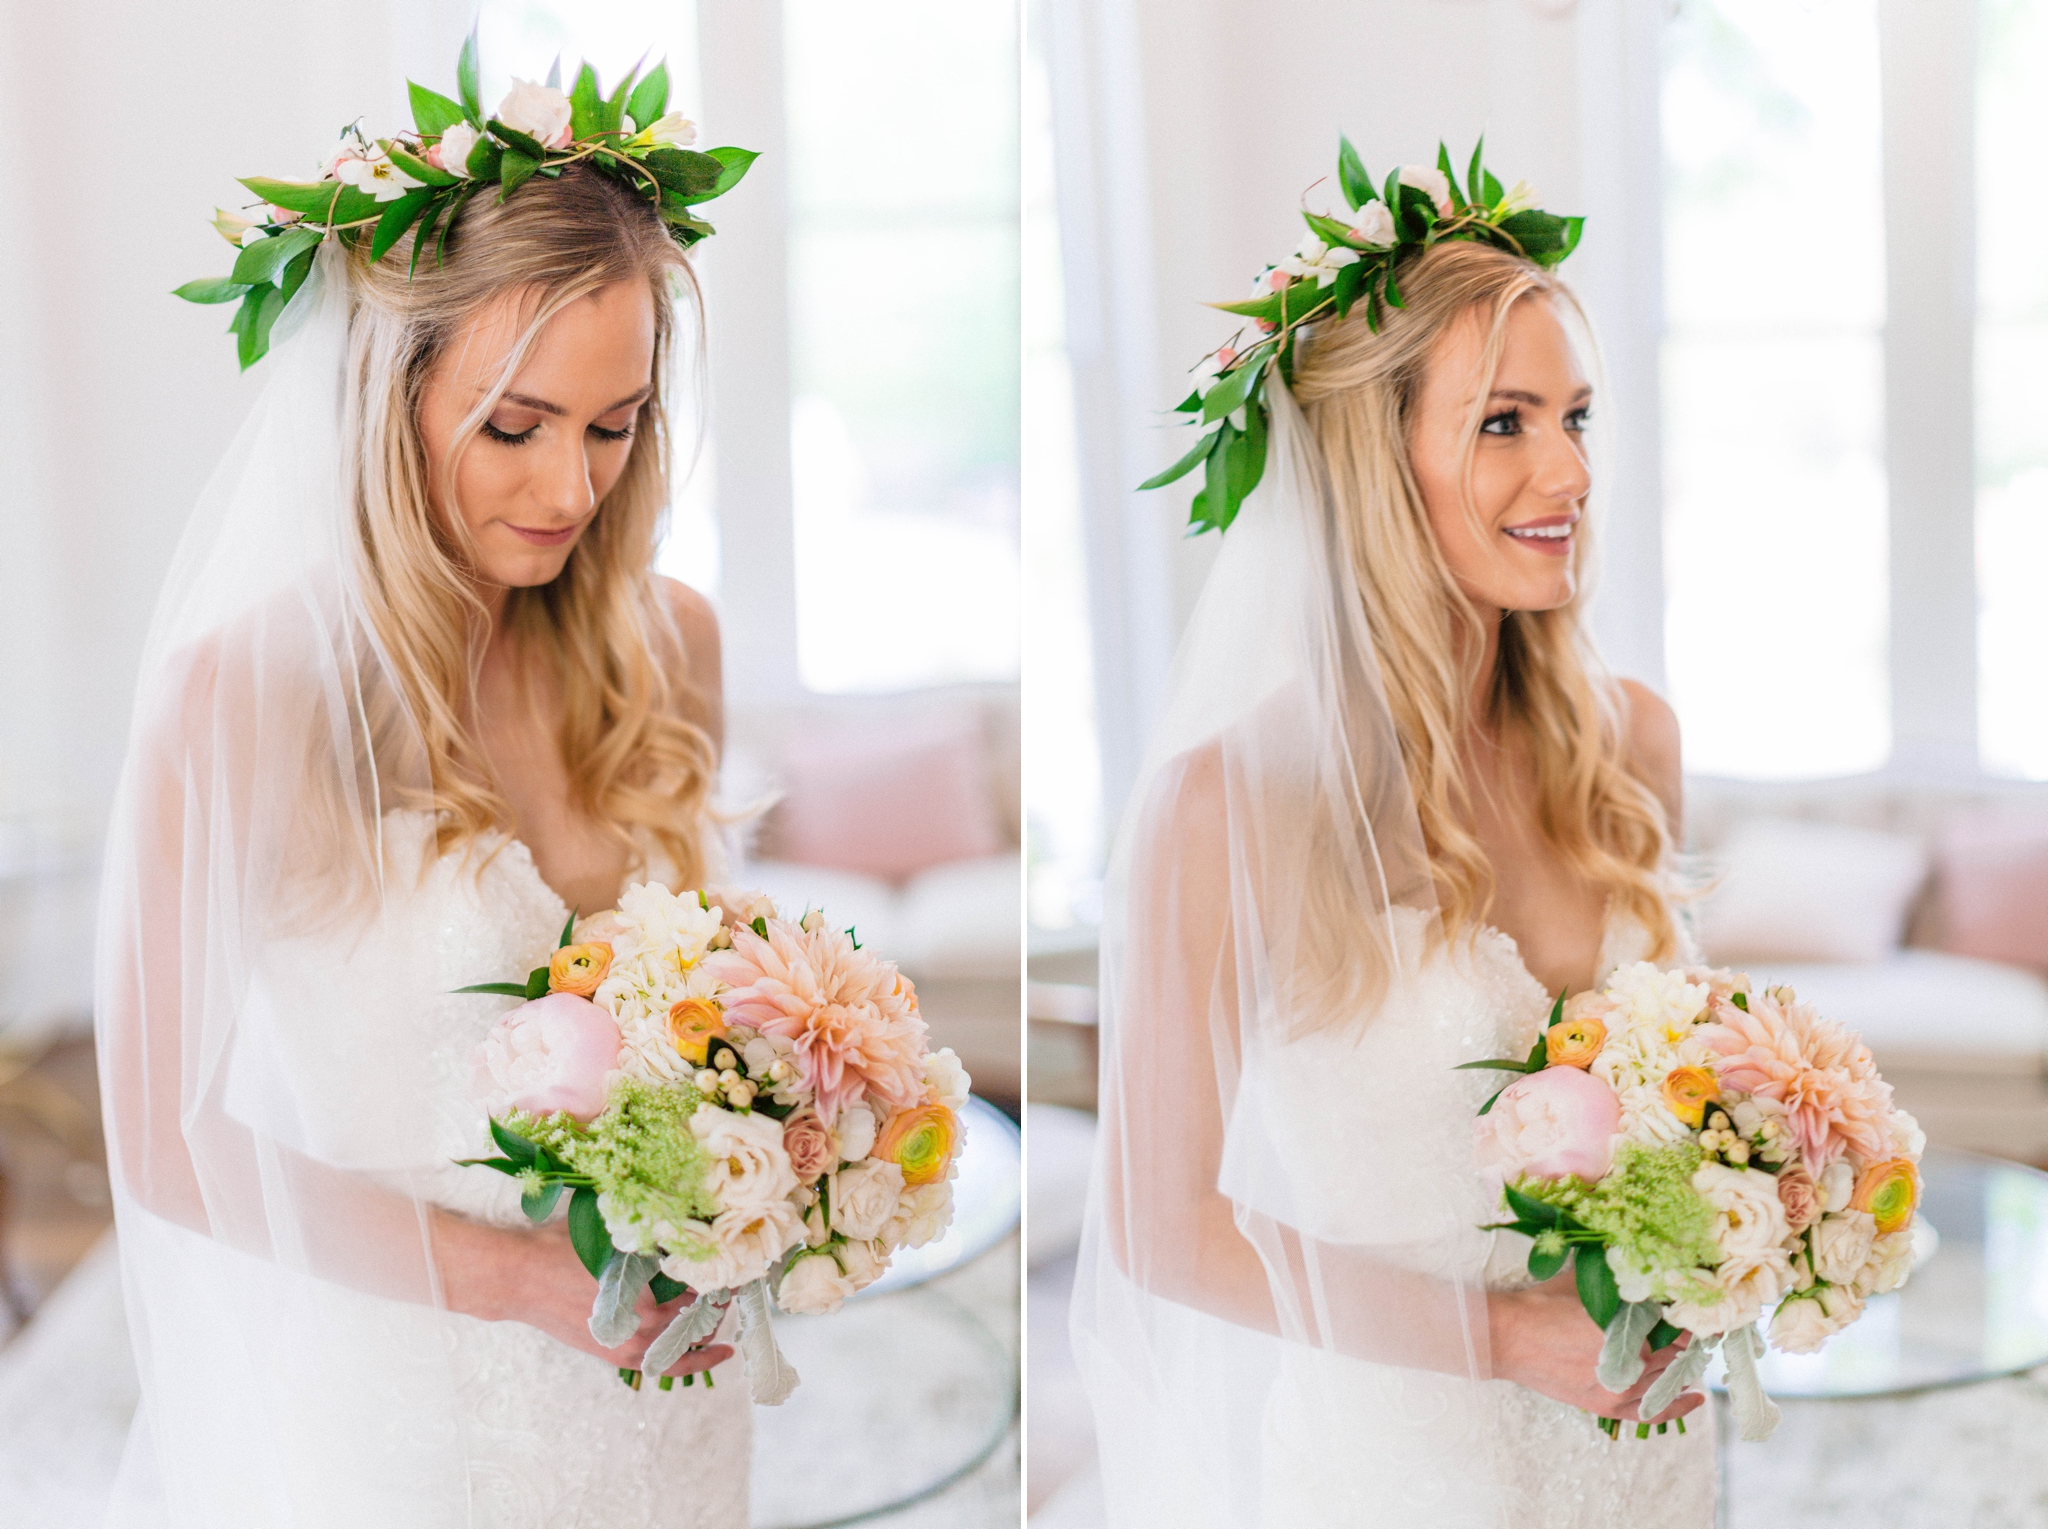  Indoor Bridal Portraits in an all white room at a luxury estate with natural light before the ceremony - Bride is wearing a Hawaiian Flower Crown and a cathedral veil in a Wedding Gown by Stella York and standing in the doorway with a golden chandel